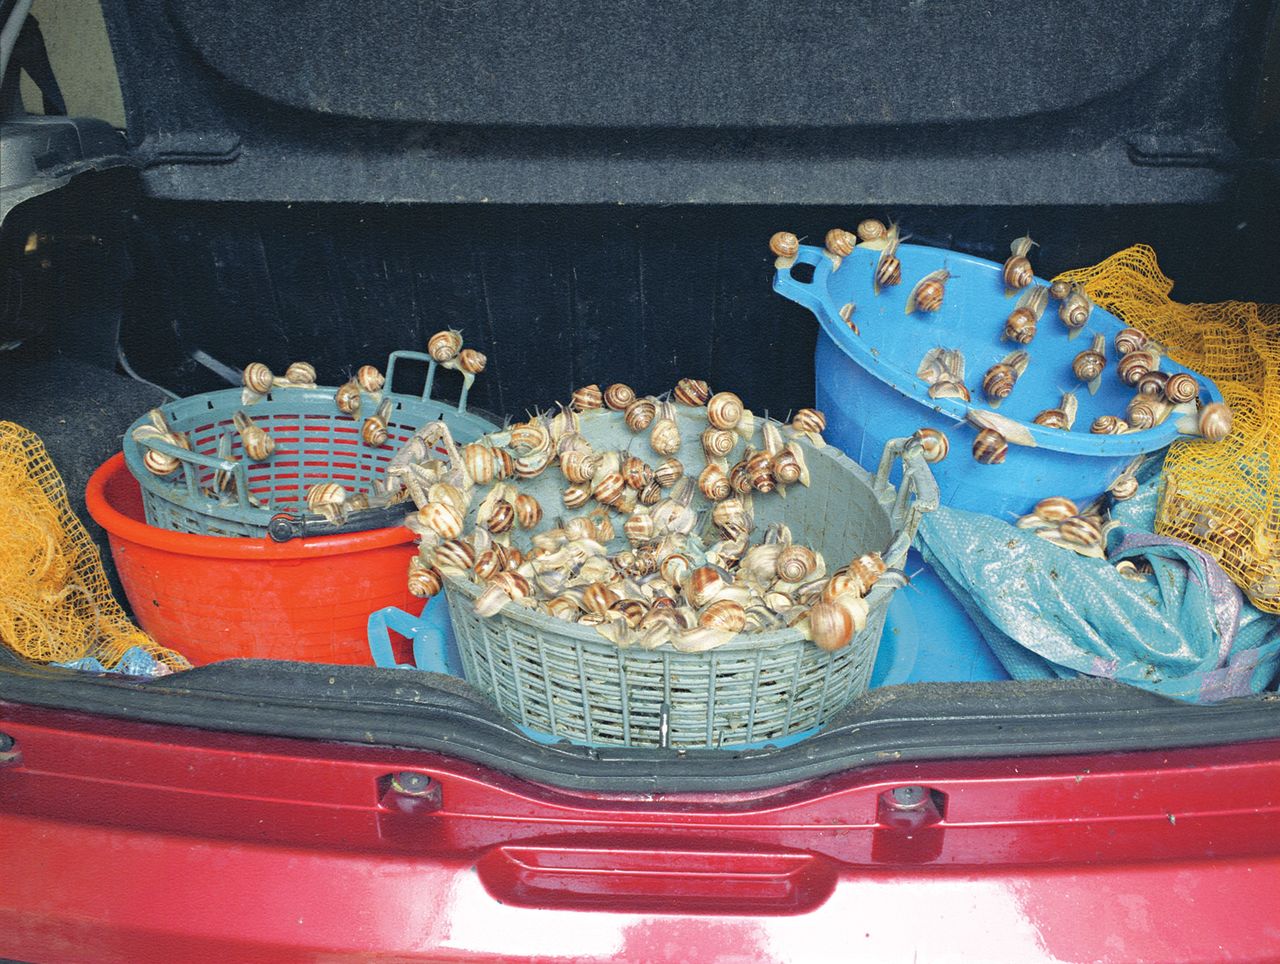 In June, wild snails are gathered to be served during the feast of San Onofrio.